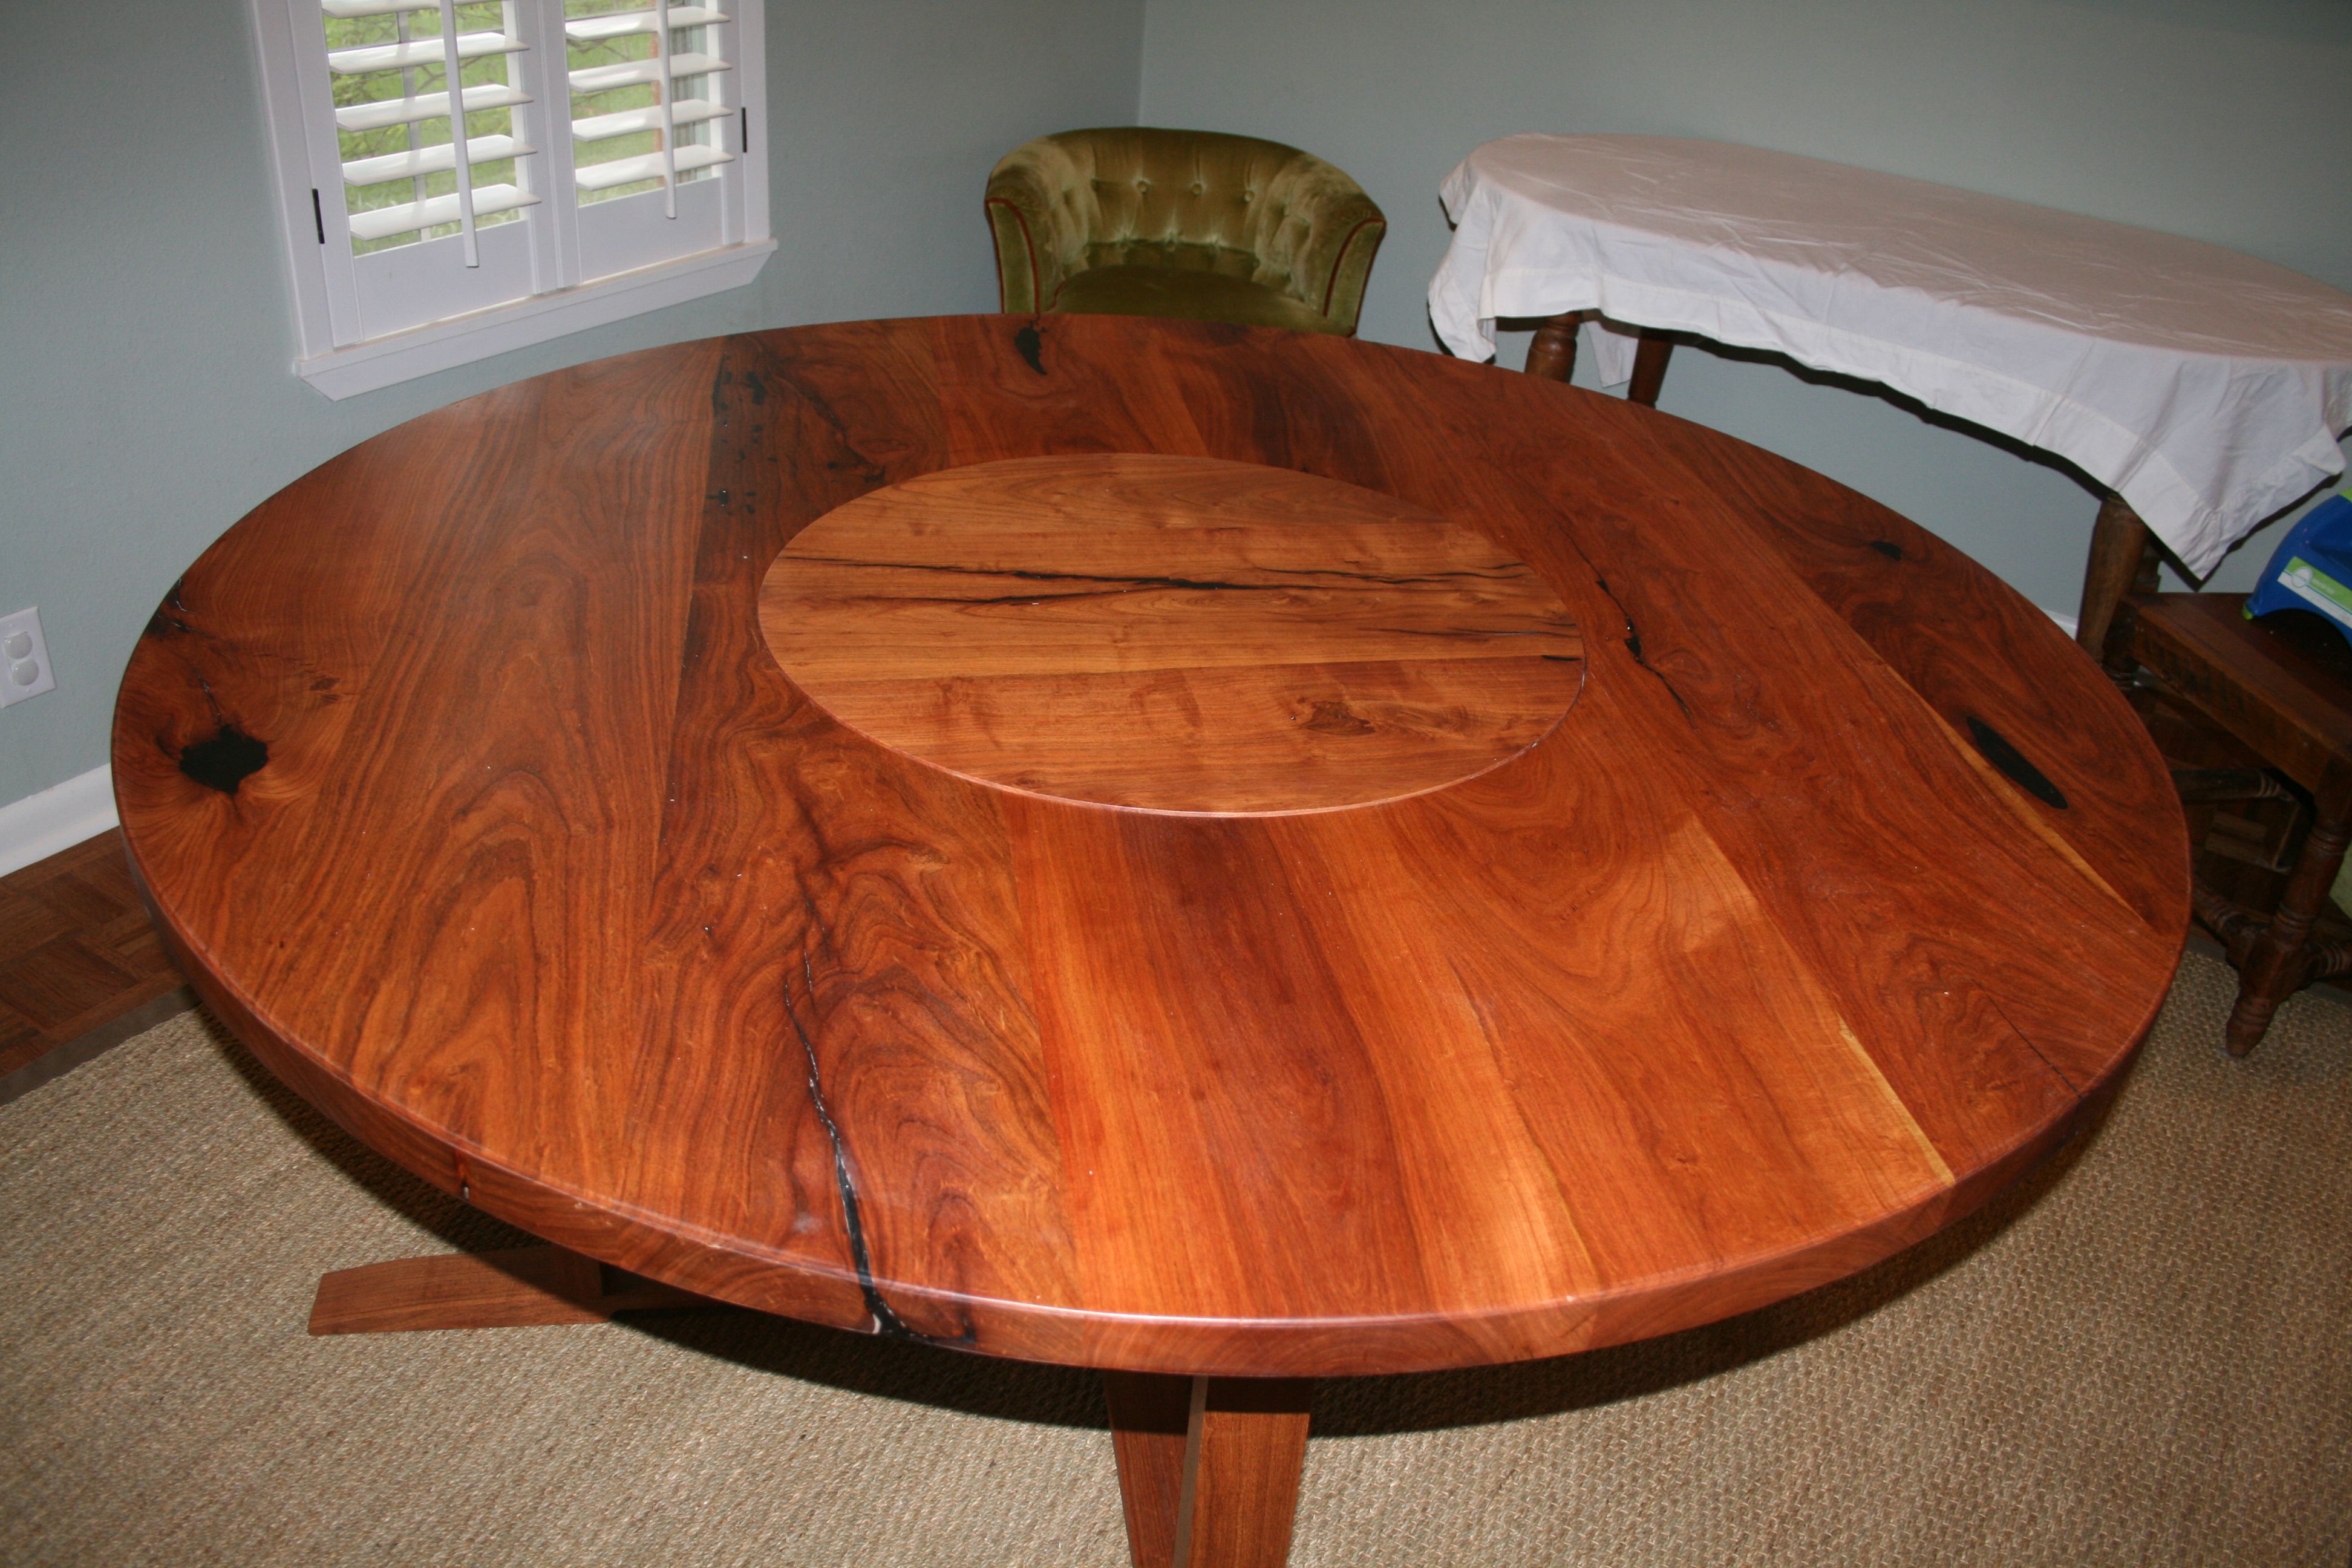 Large Round Dining Room Table With Lazy Susan